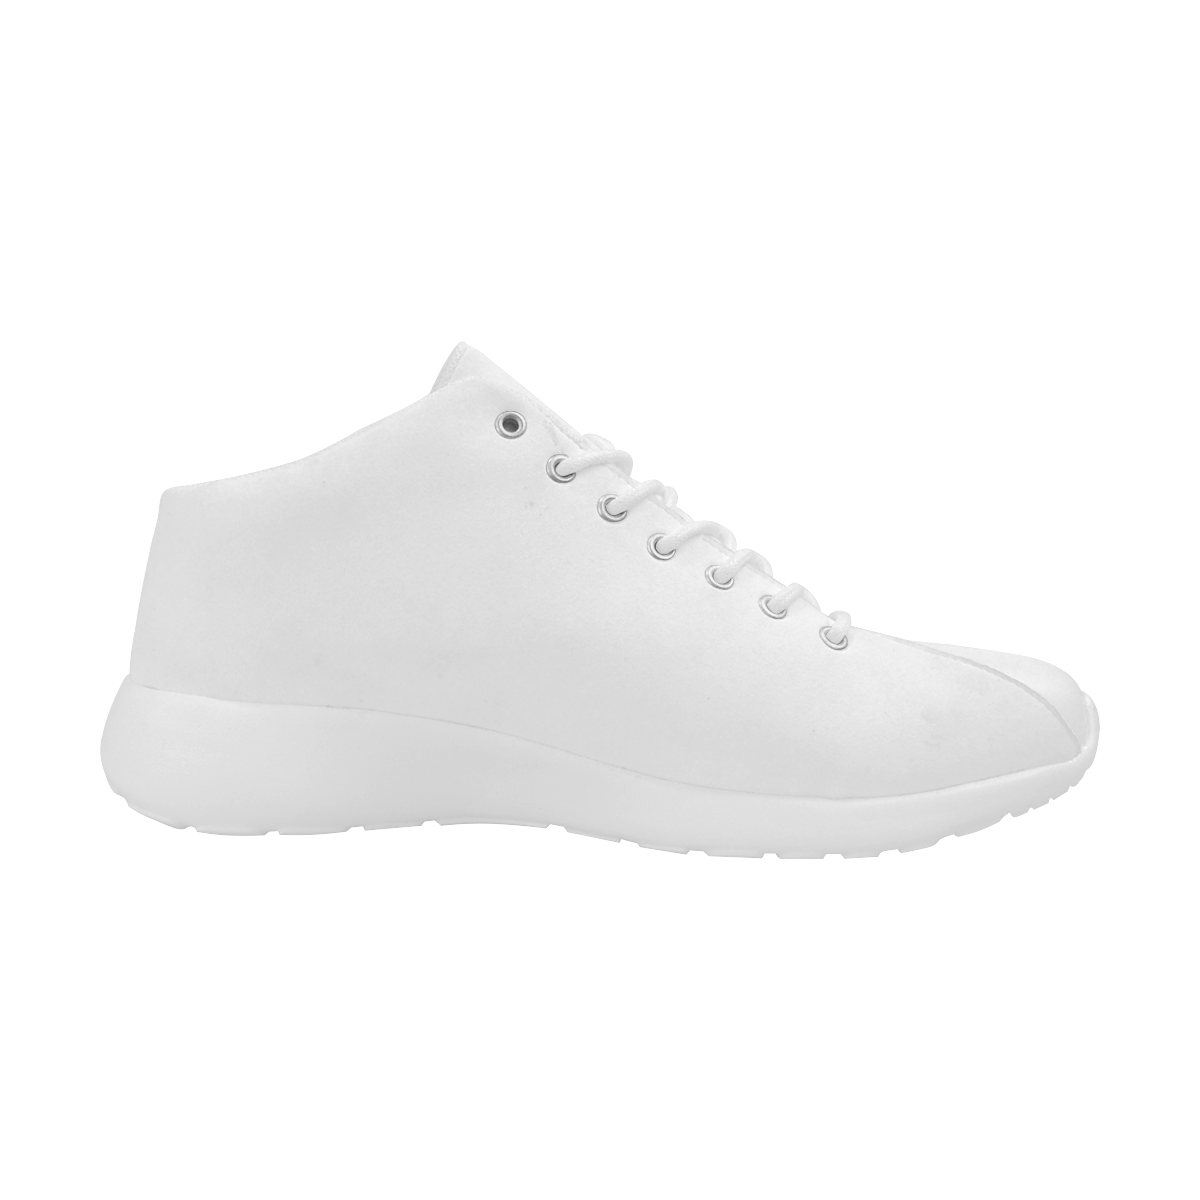 Wonderful Winter White Solid Colored Men's Basketball Training Shoes (Model 47502)